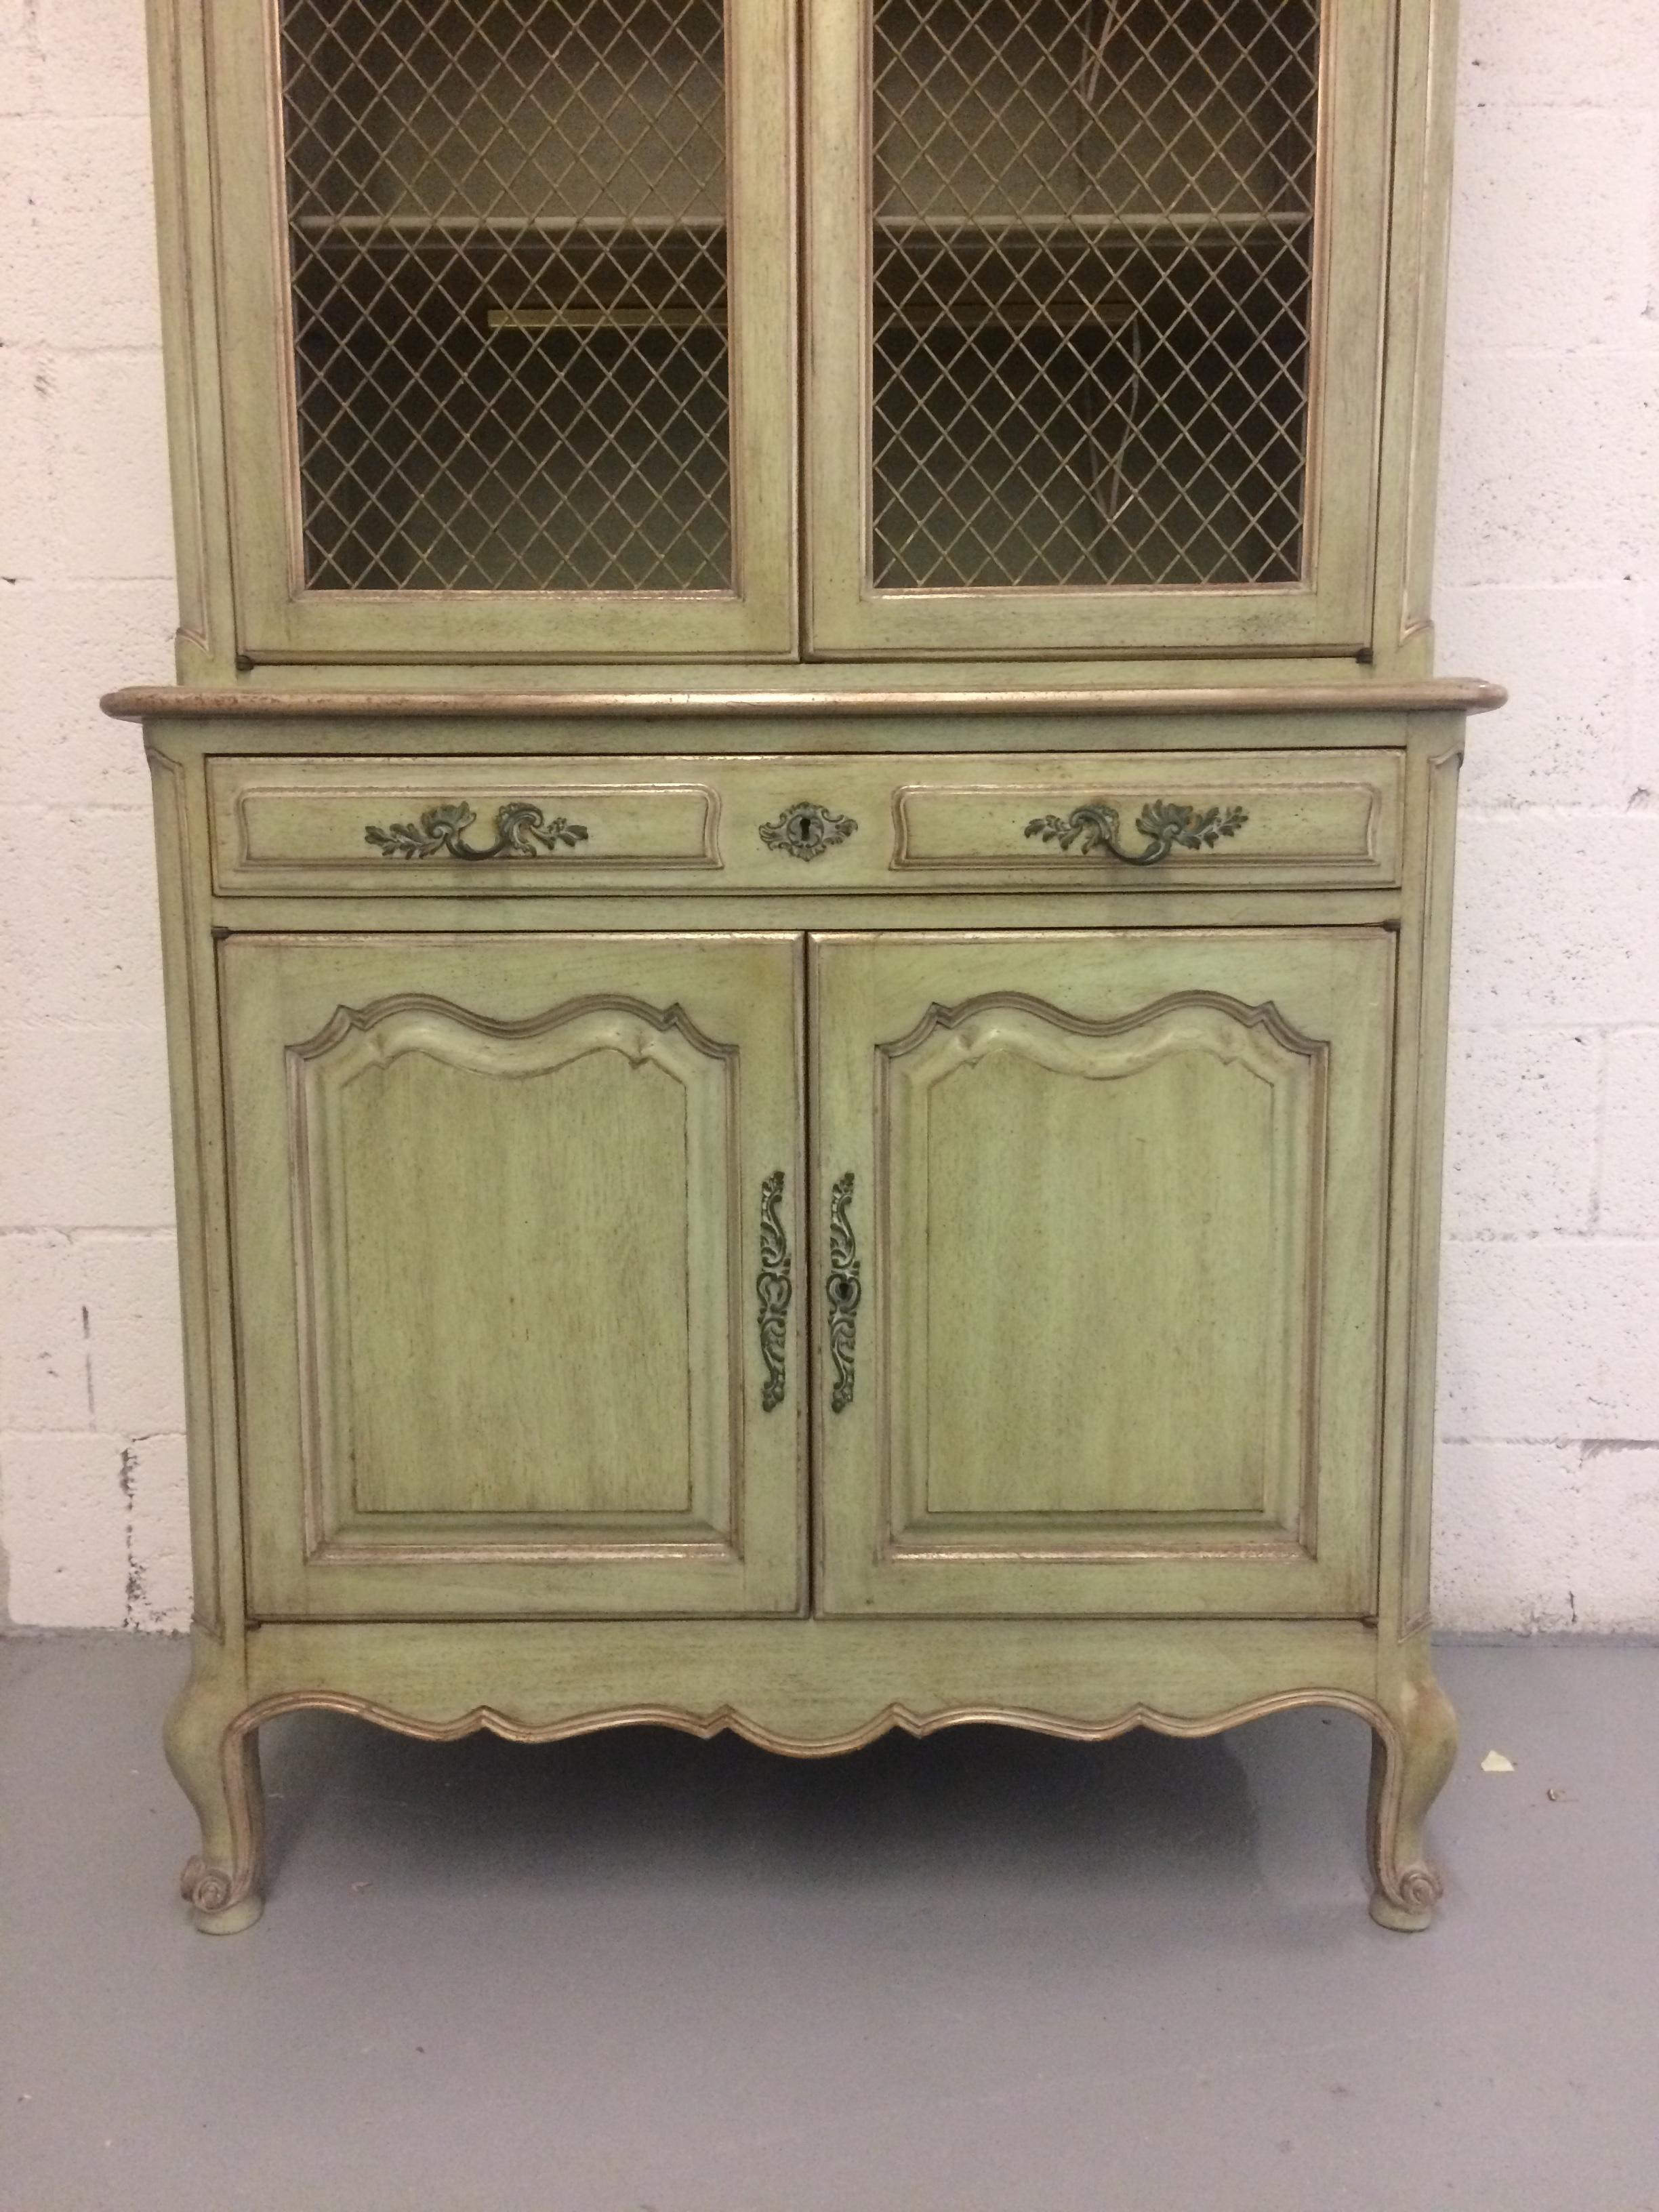 20th Century French Provincial Stepback Cupboard with Wire Mesh